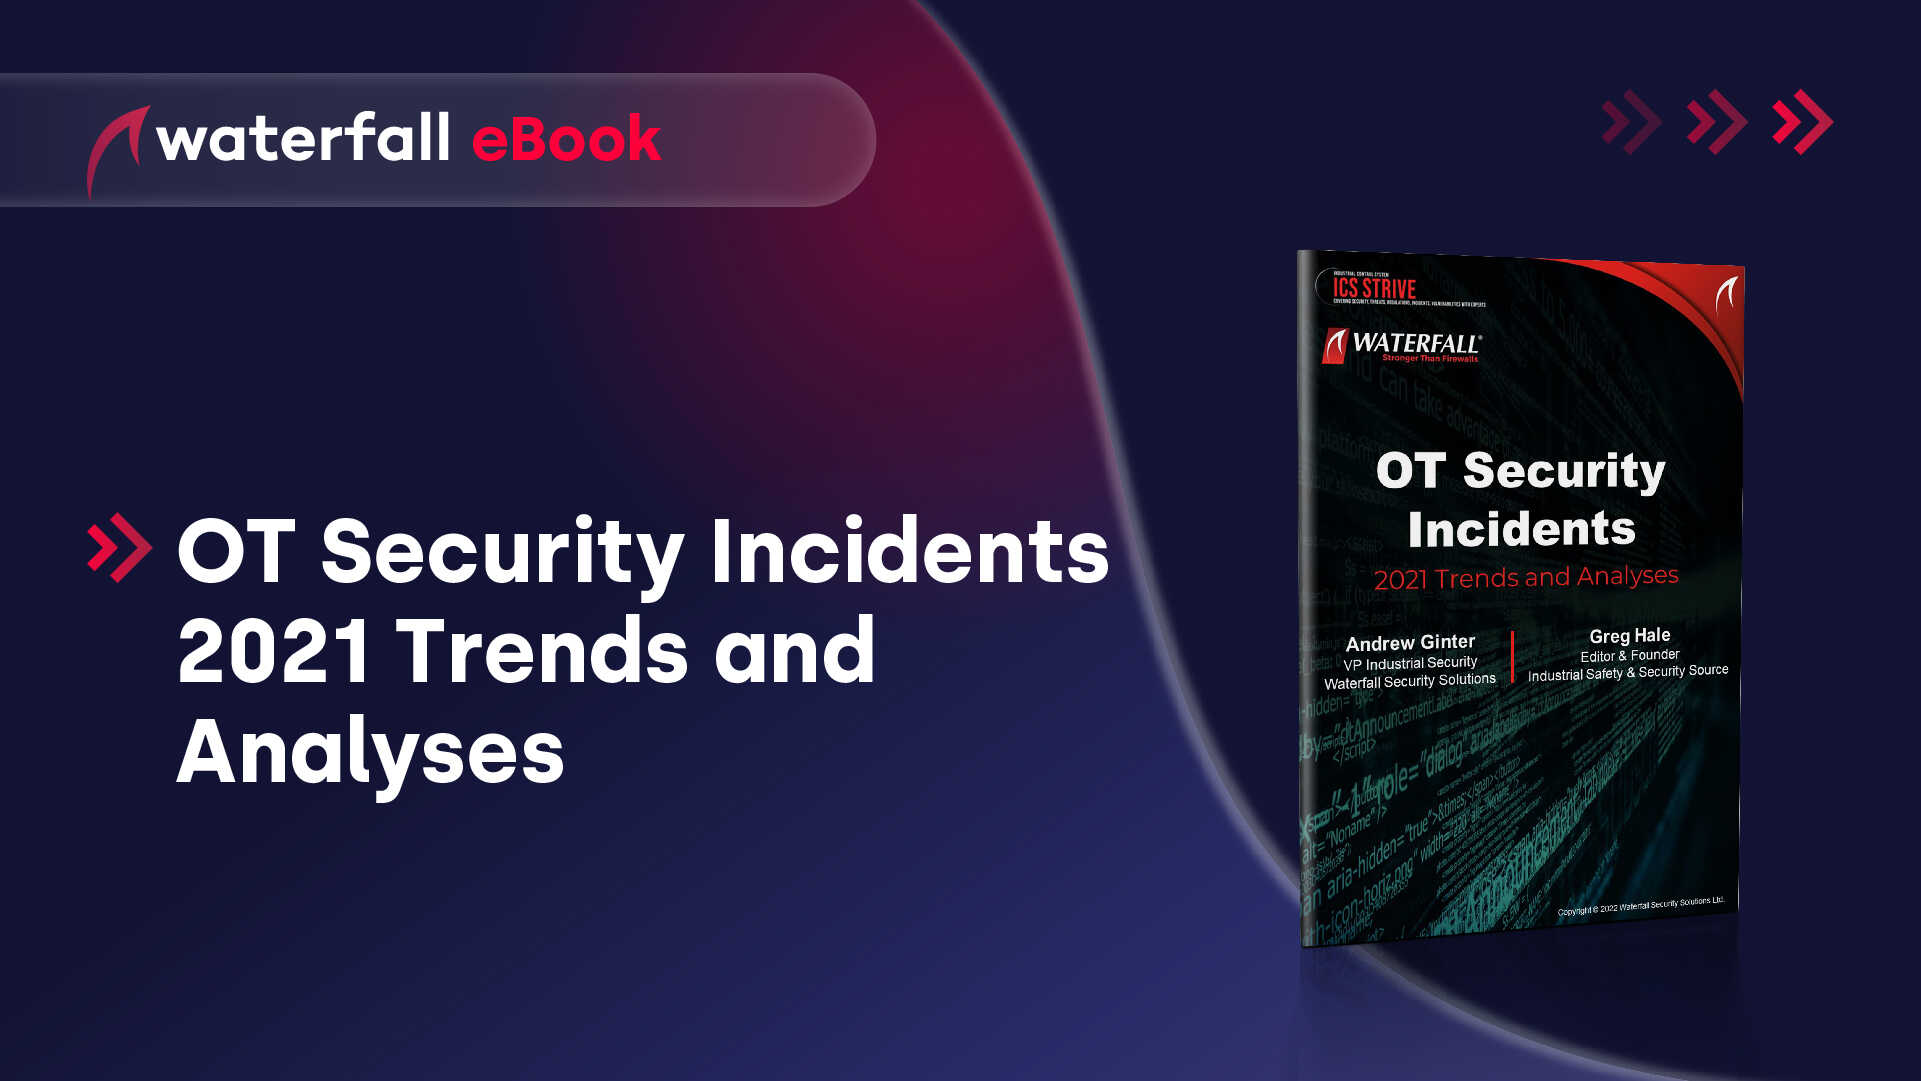 OT Security Incidents In 2021